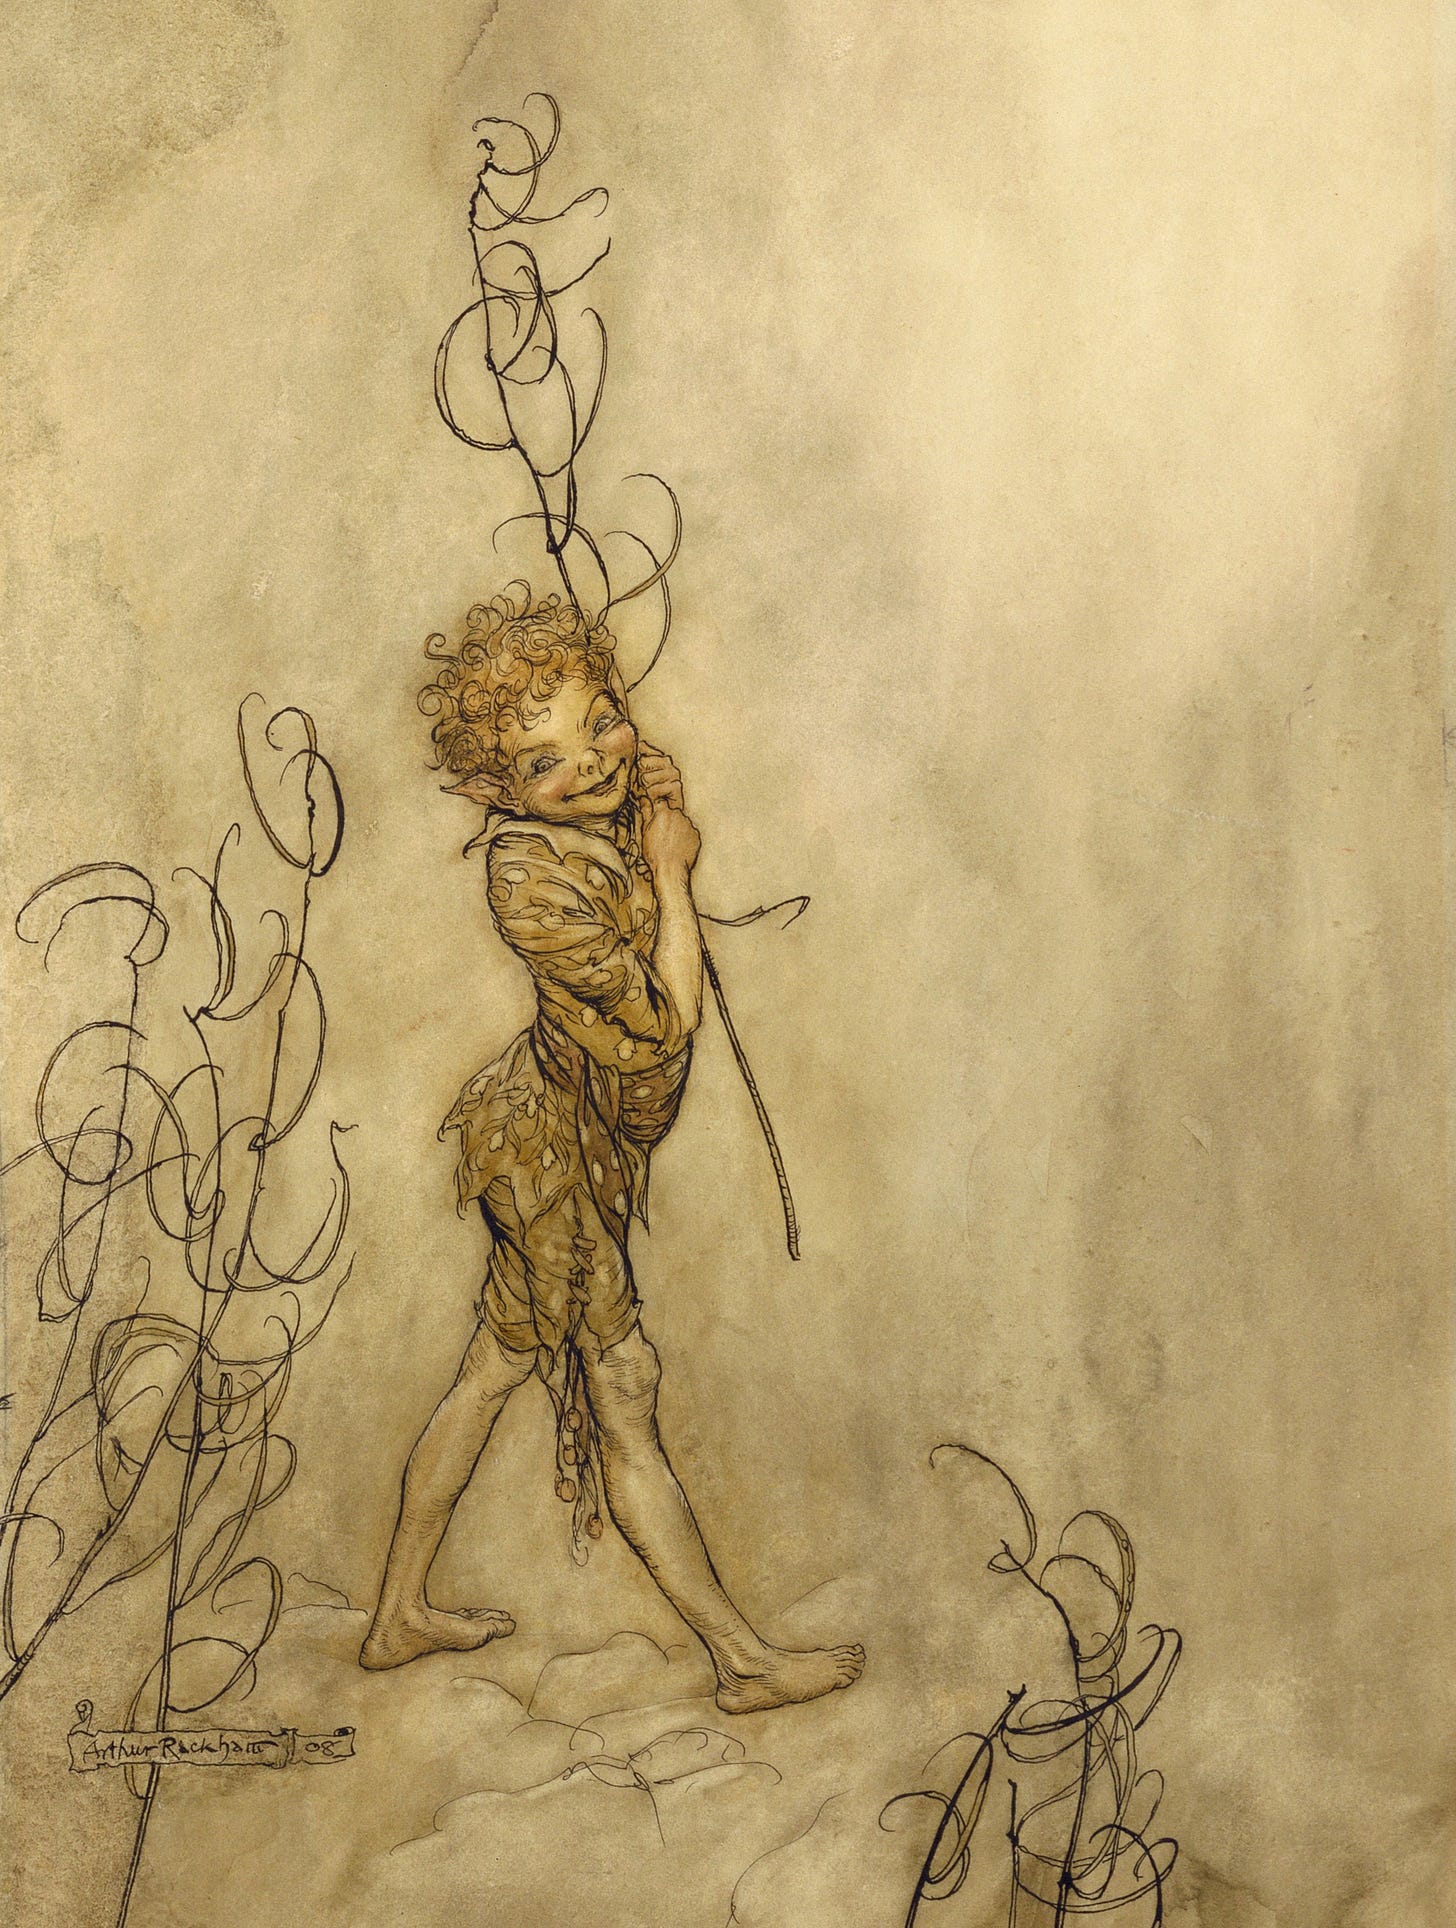 Art: Puck - "Lord what fools these mortals be" by Arthur Rackham